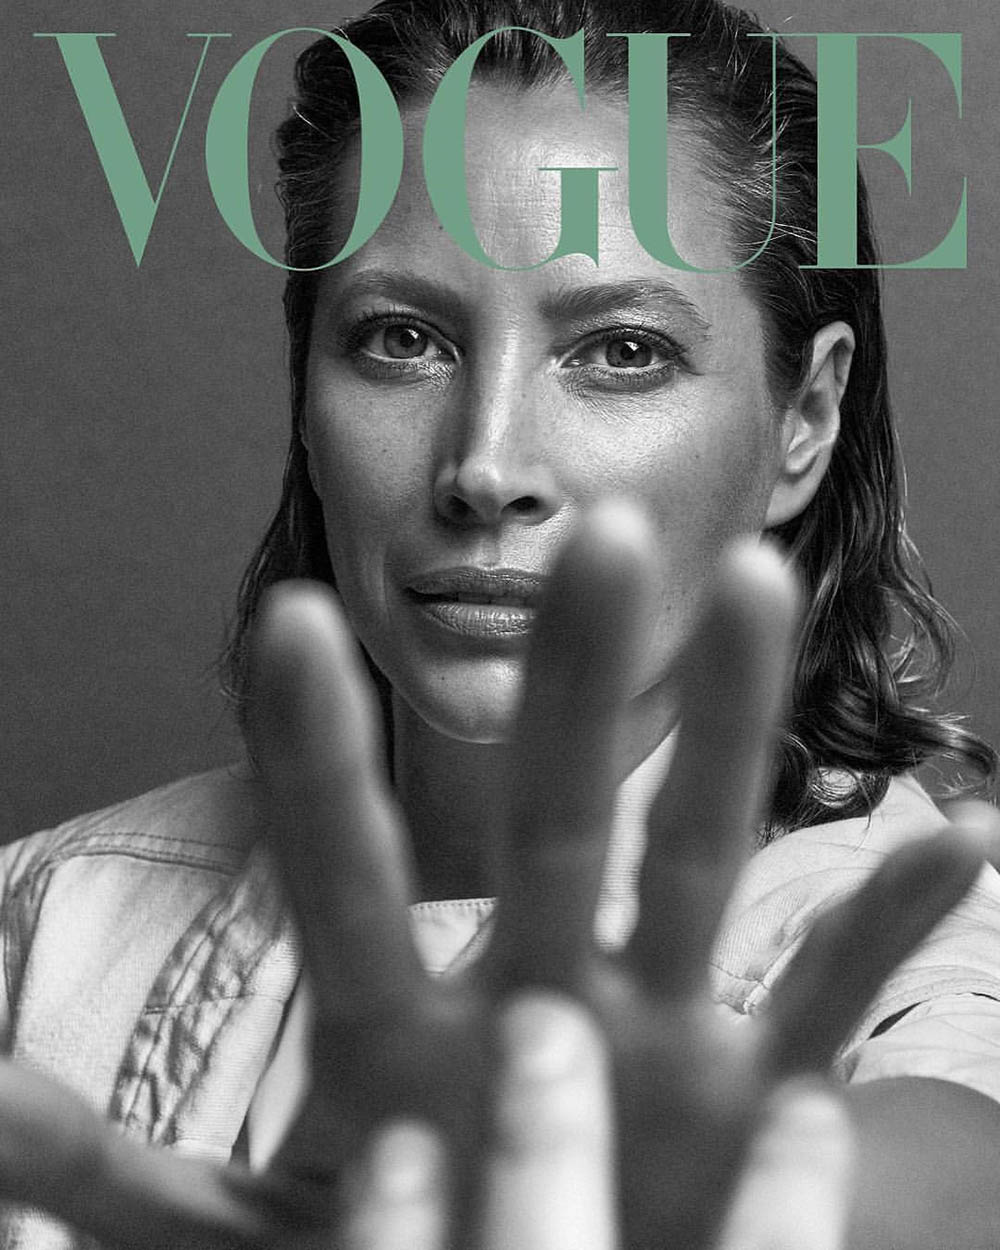 Christy Turlington covers Vogue Mexico & Latin America May 2019 by Alique